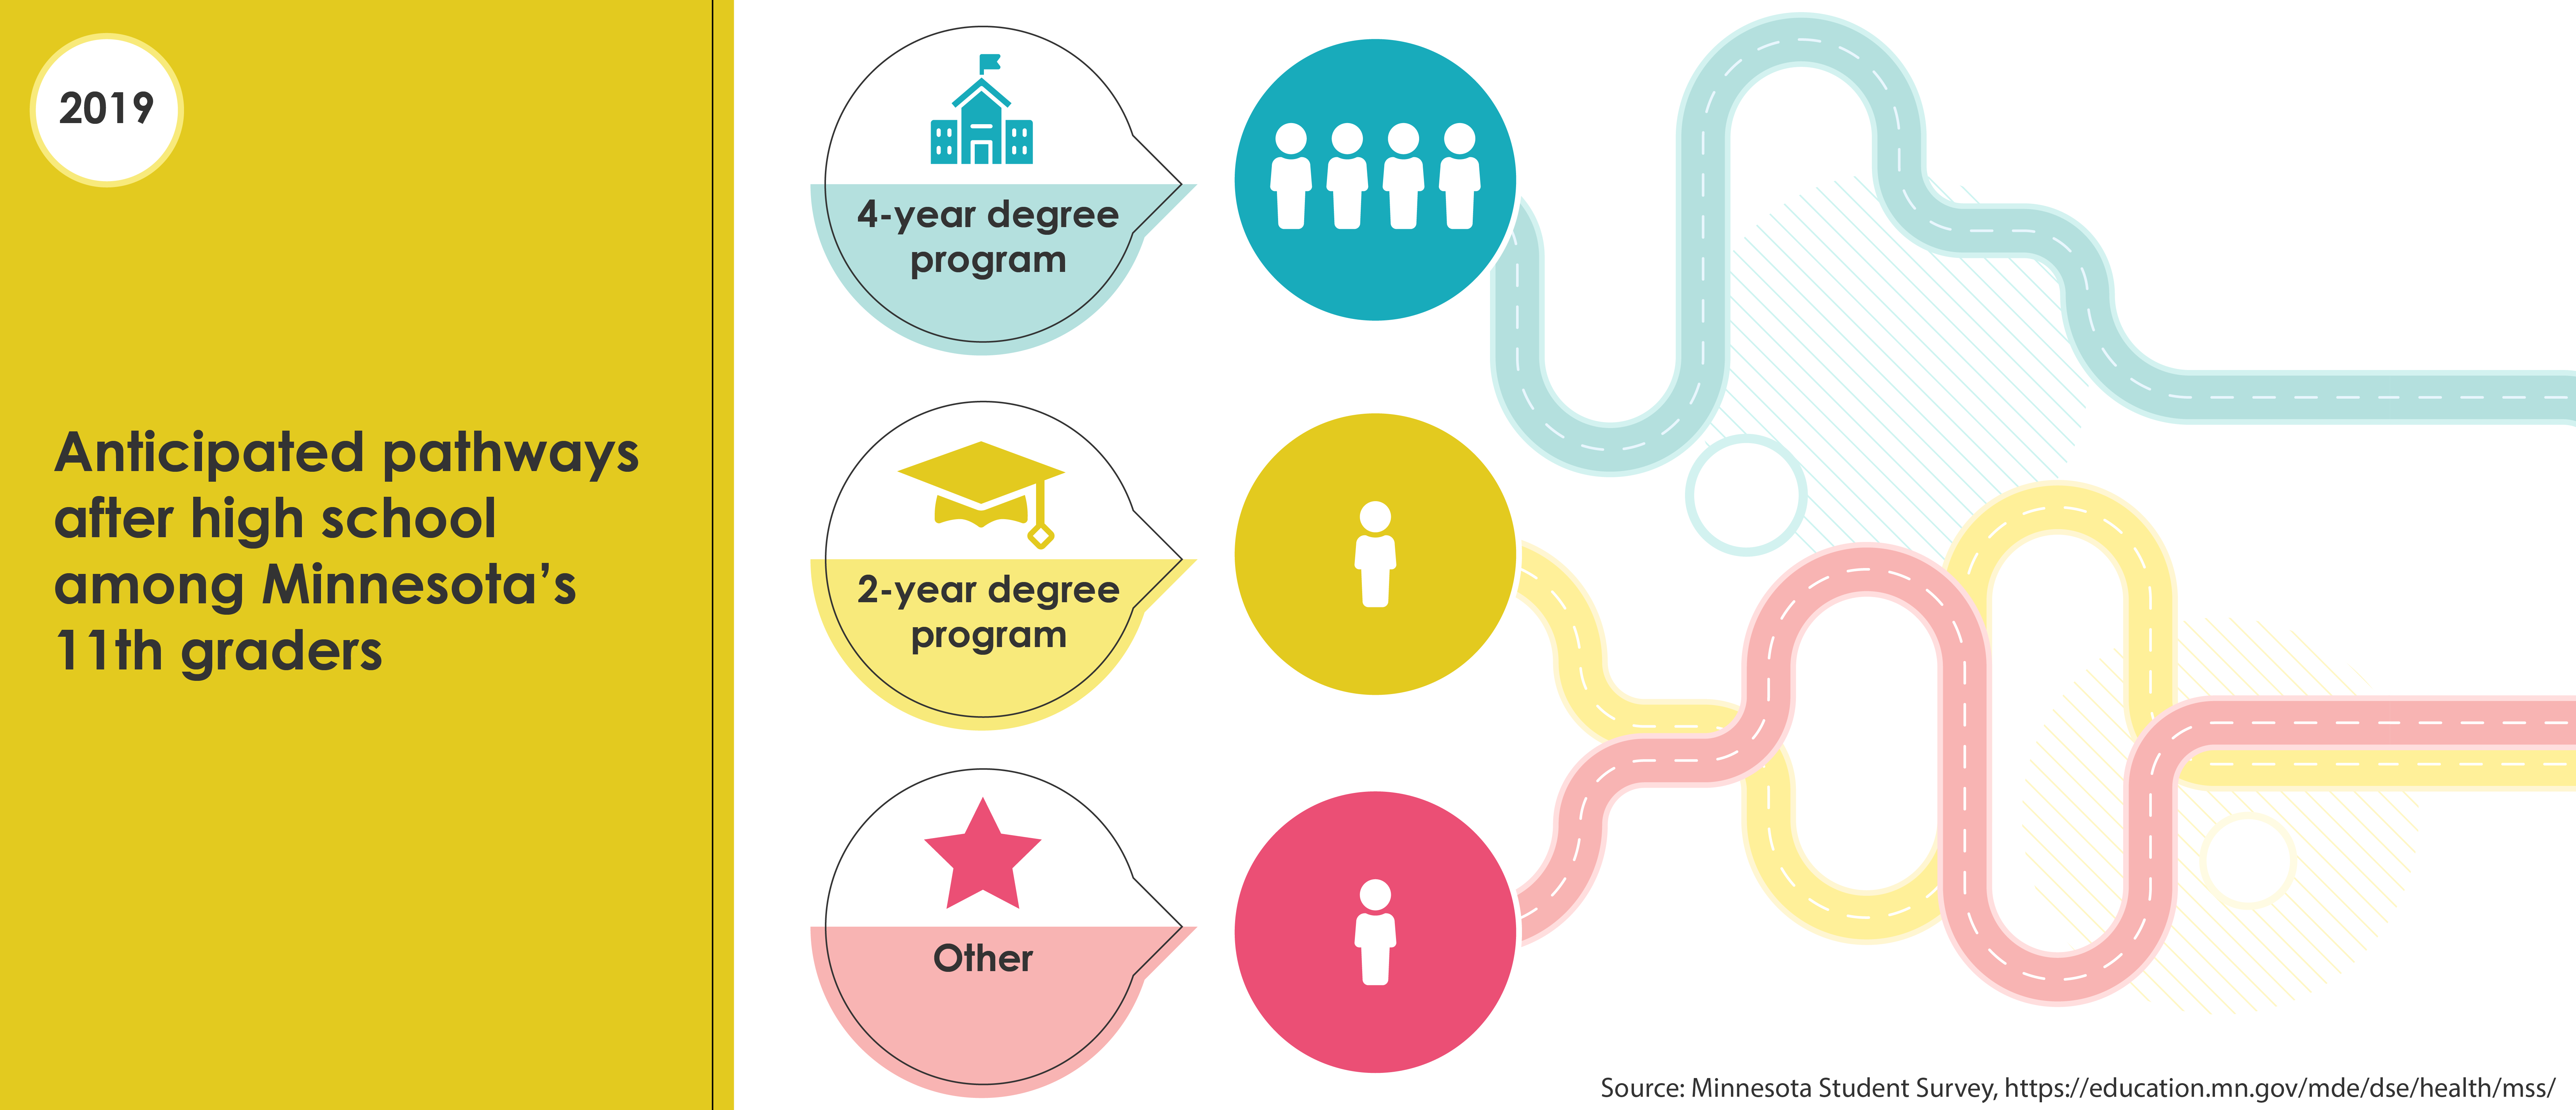 Data visualization showing four in six 11th graders expect to attend a 4-year college, one in six anticipate attending a 2-year college, and one in six expect to work right away.